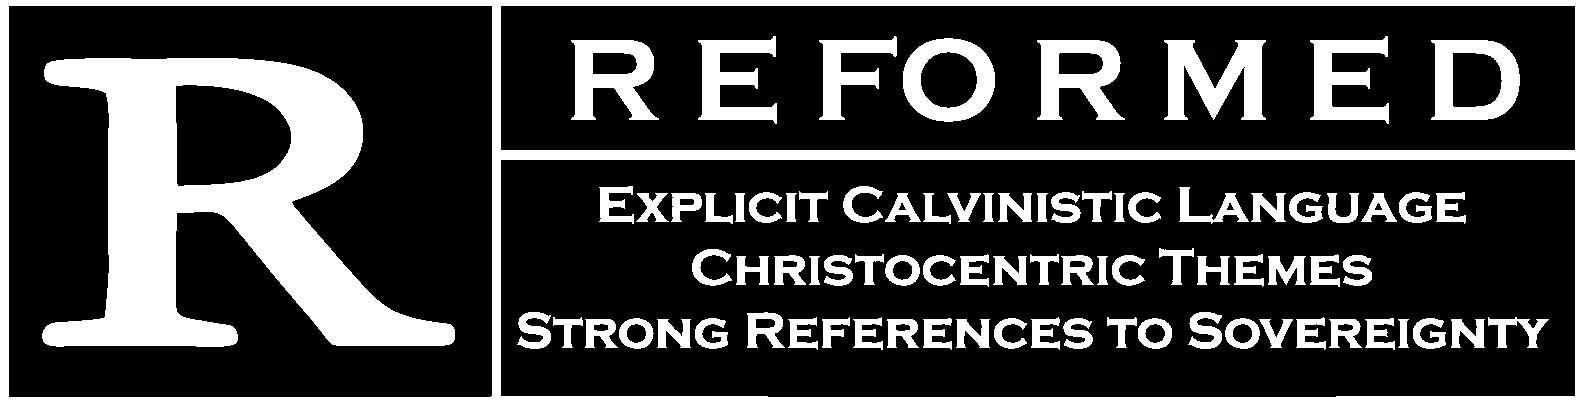 Reformed Logo - What does it mean to be a “Reformed” Christian? (Part I). A